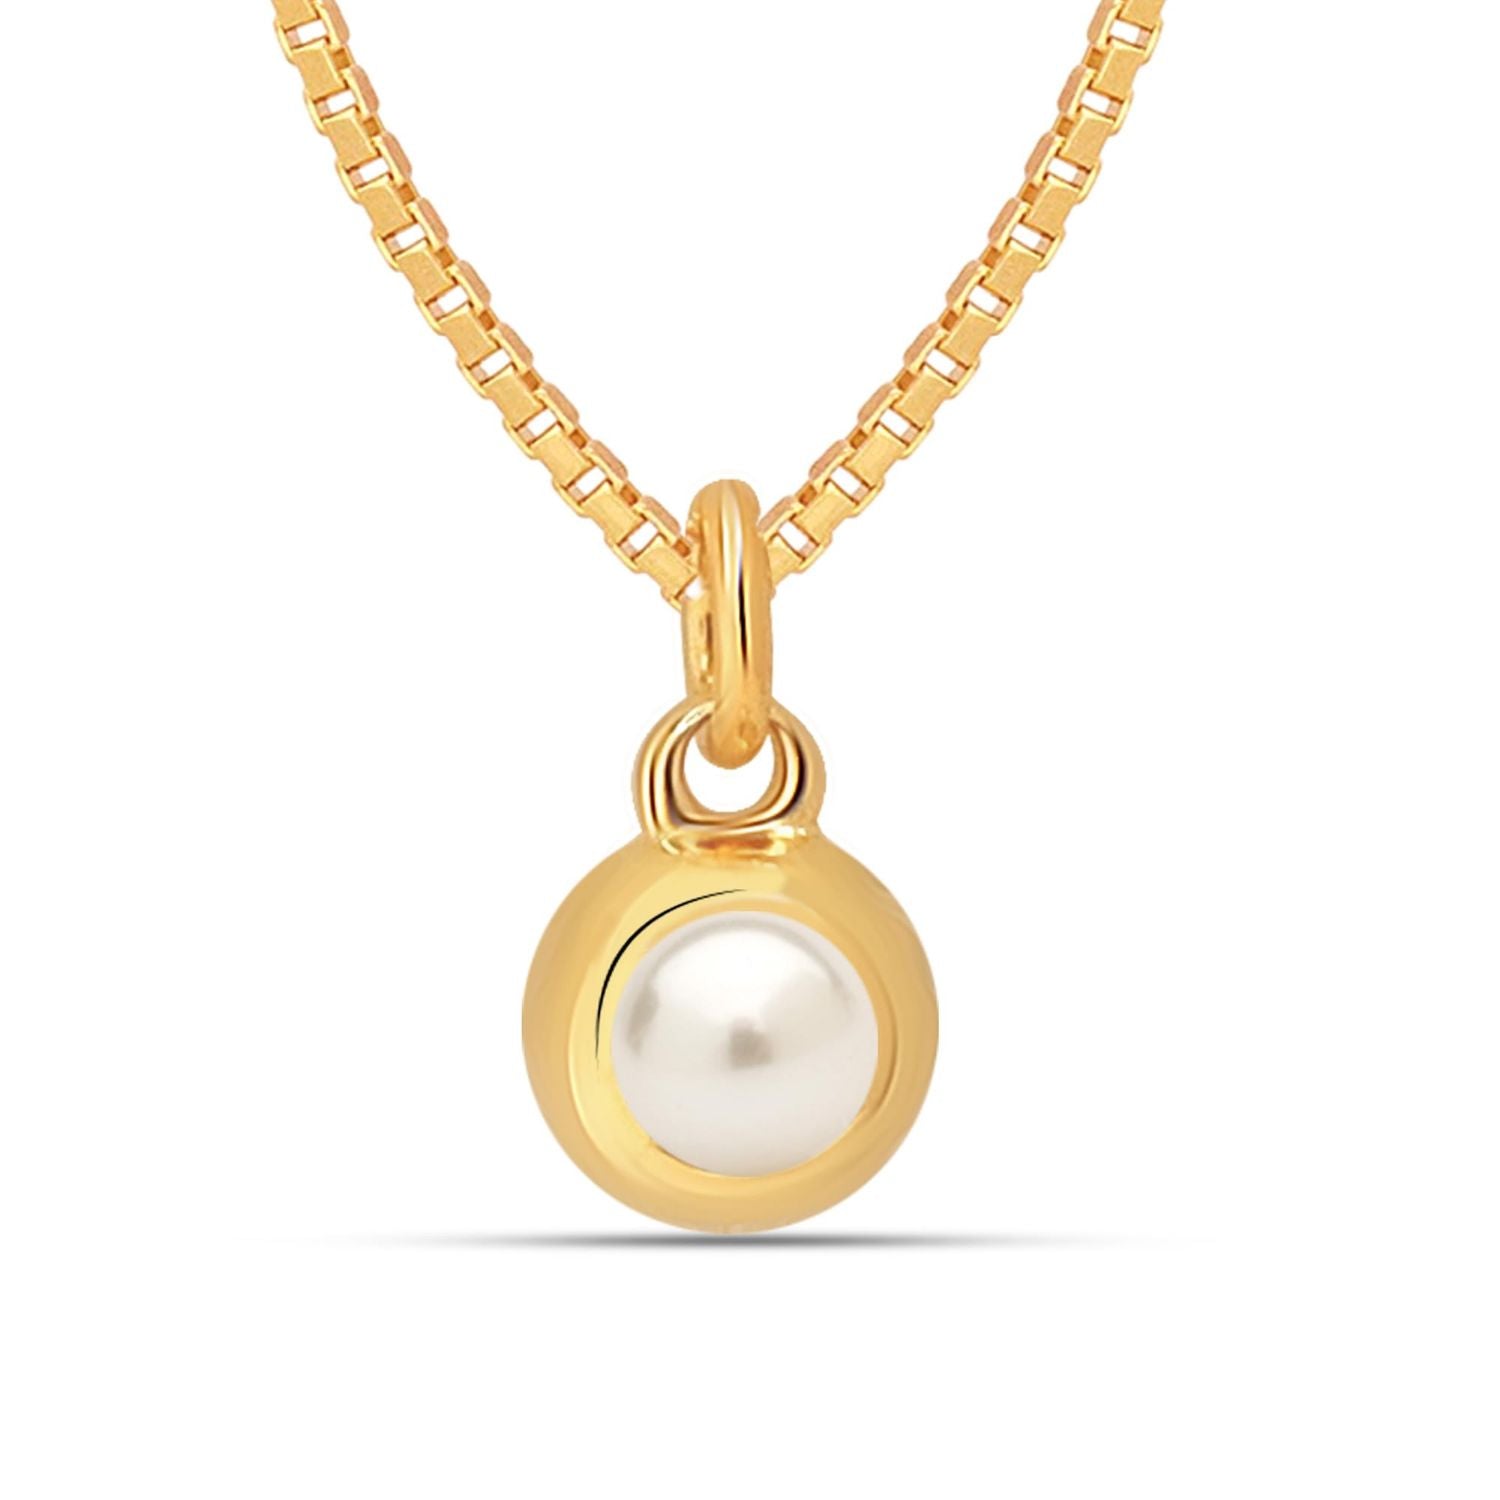 925 Sterling Silver 14K Gold Plated Adjustable Pave Simulated Pearl Pendant Necklace for Women